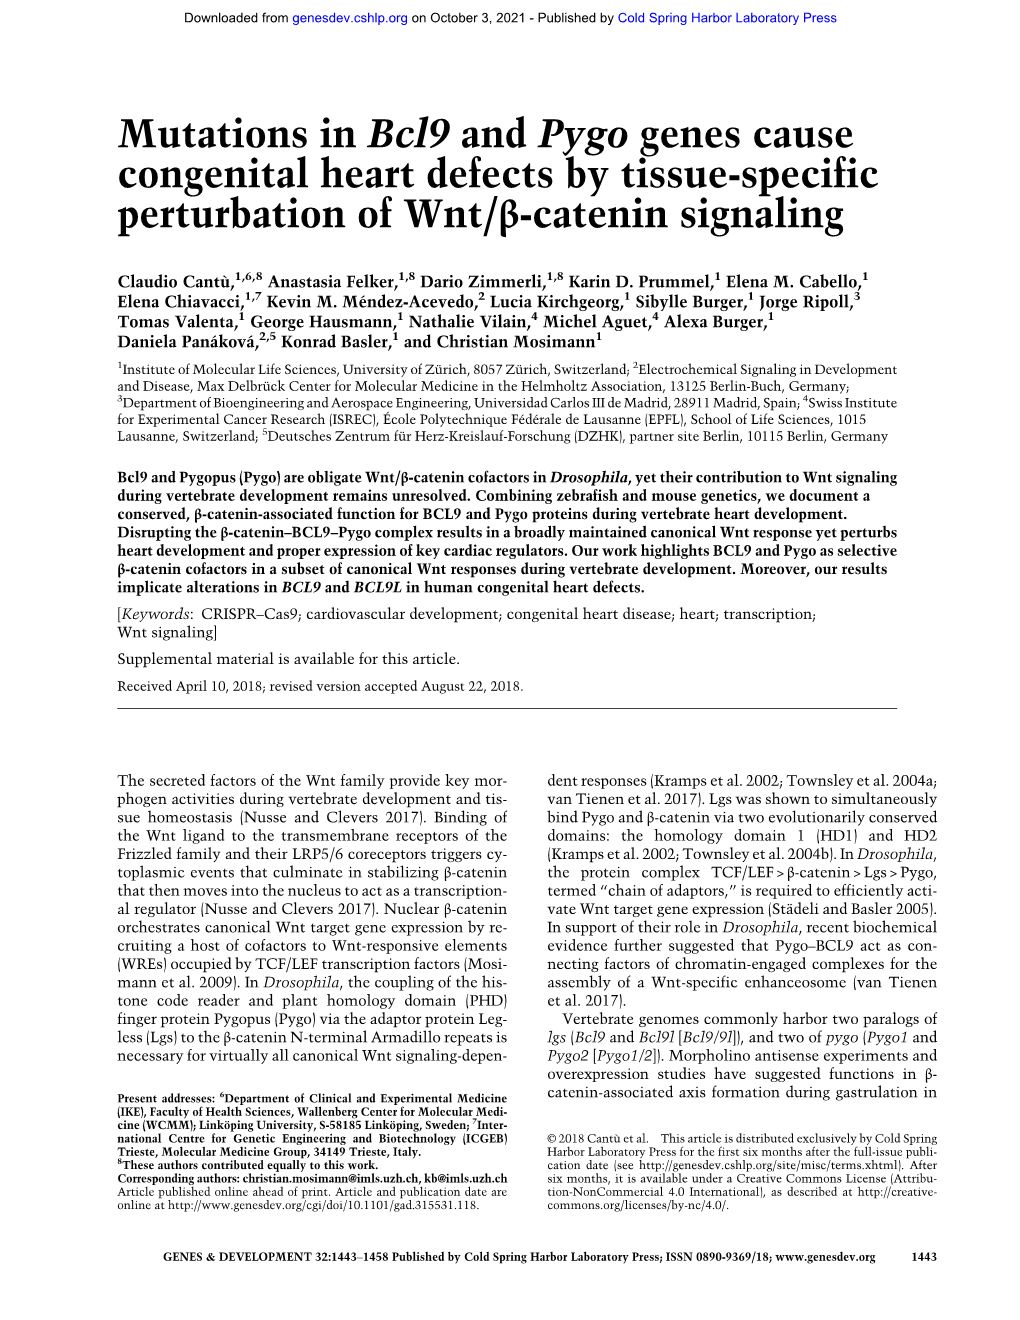 Mutations in Bcl9 and Pygo Genes Cause Congenital Heart Defects by Tissue-Specific Perturbation of Wnt/Β-Catenin Signaling